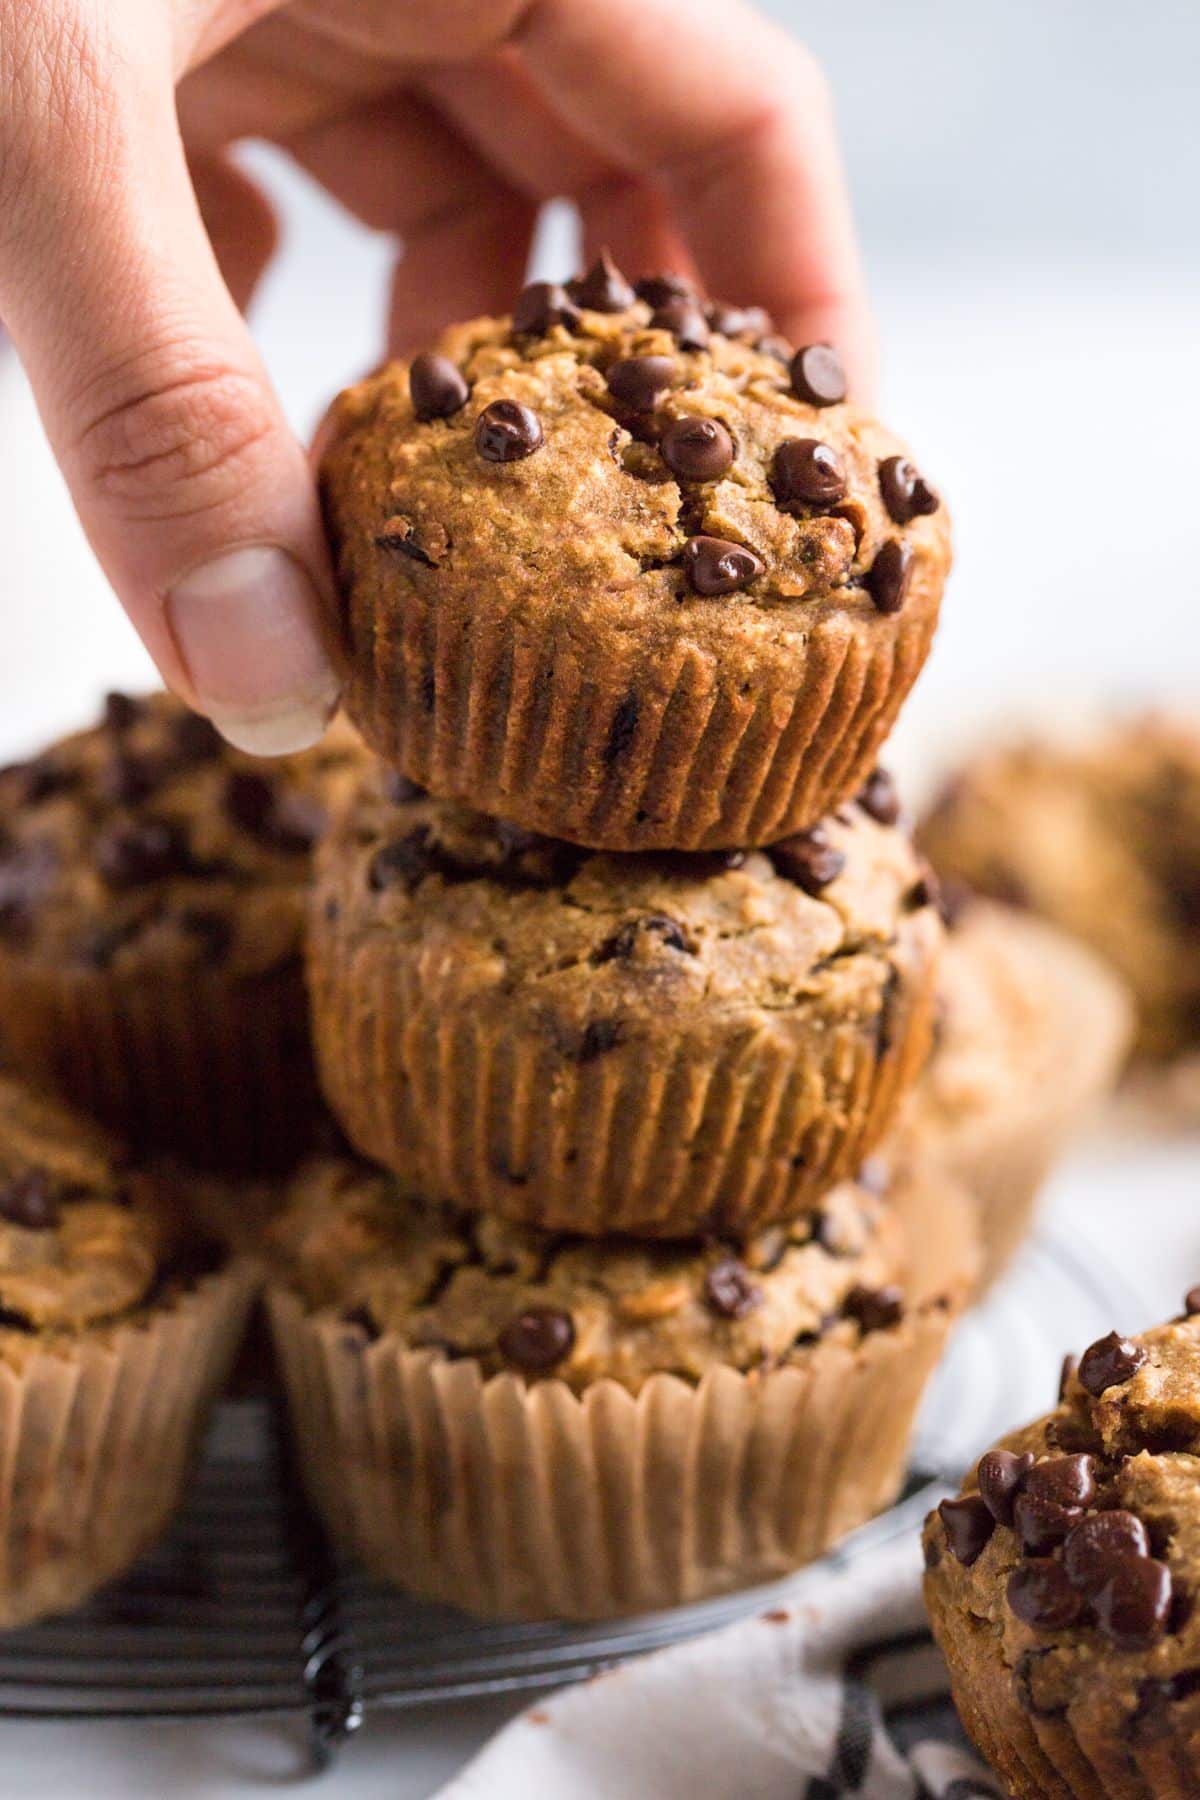 A stack of butternut squash muffins with chocolate chips on top and a hand reaching to grab one.